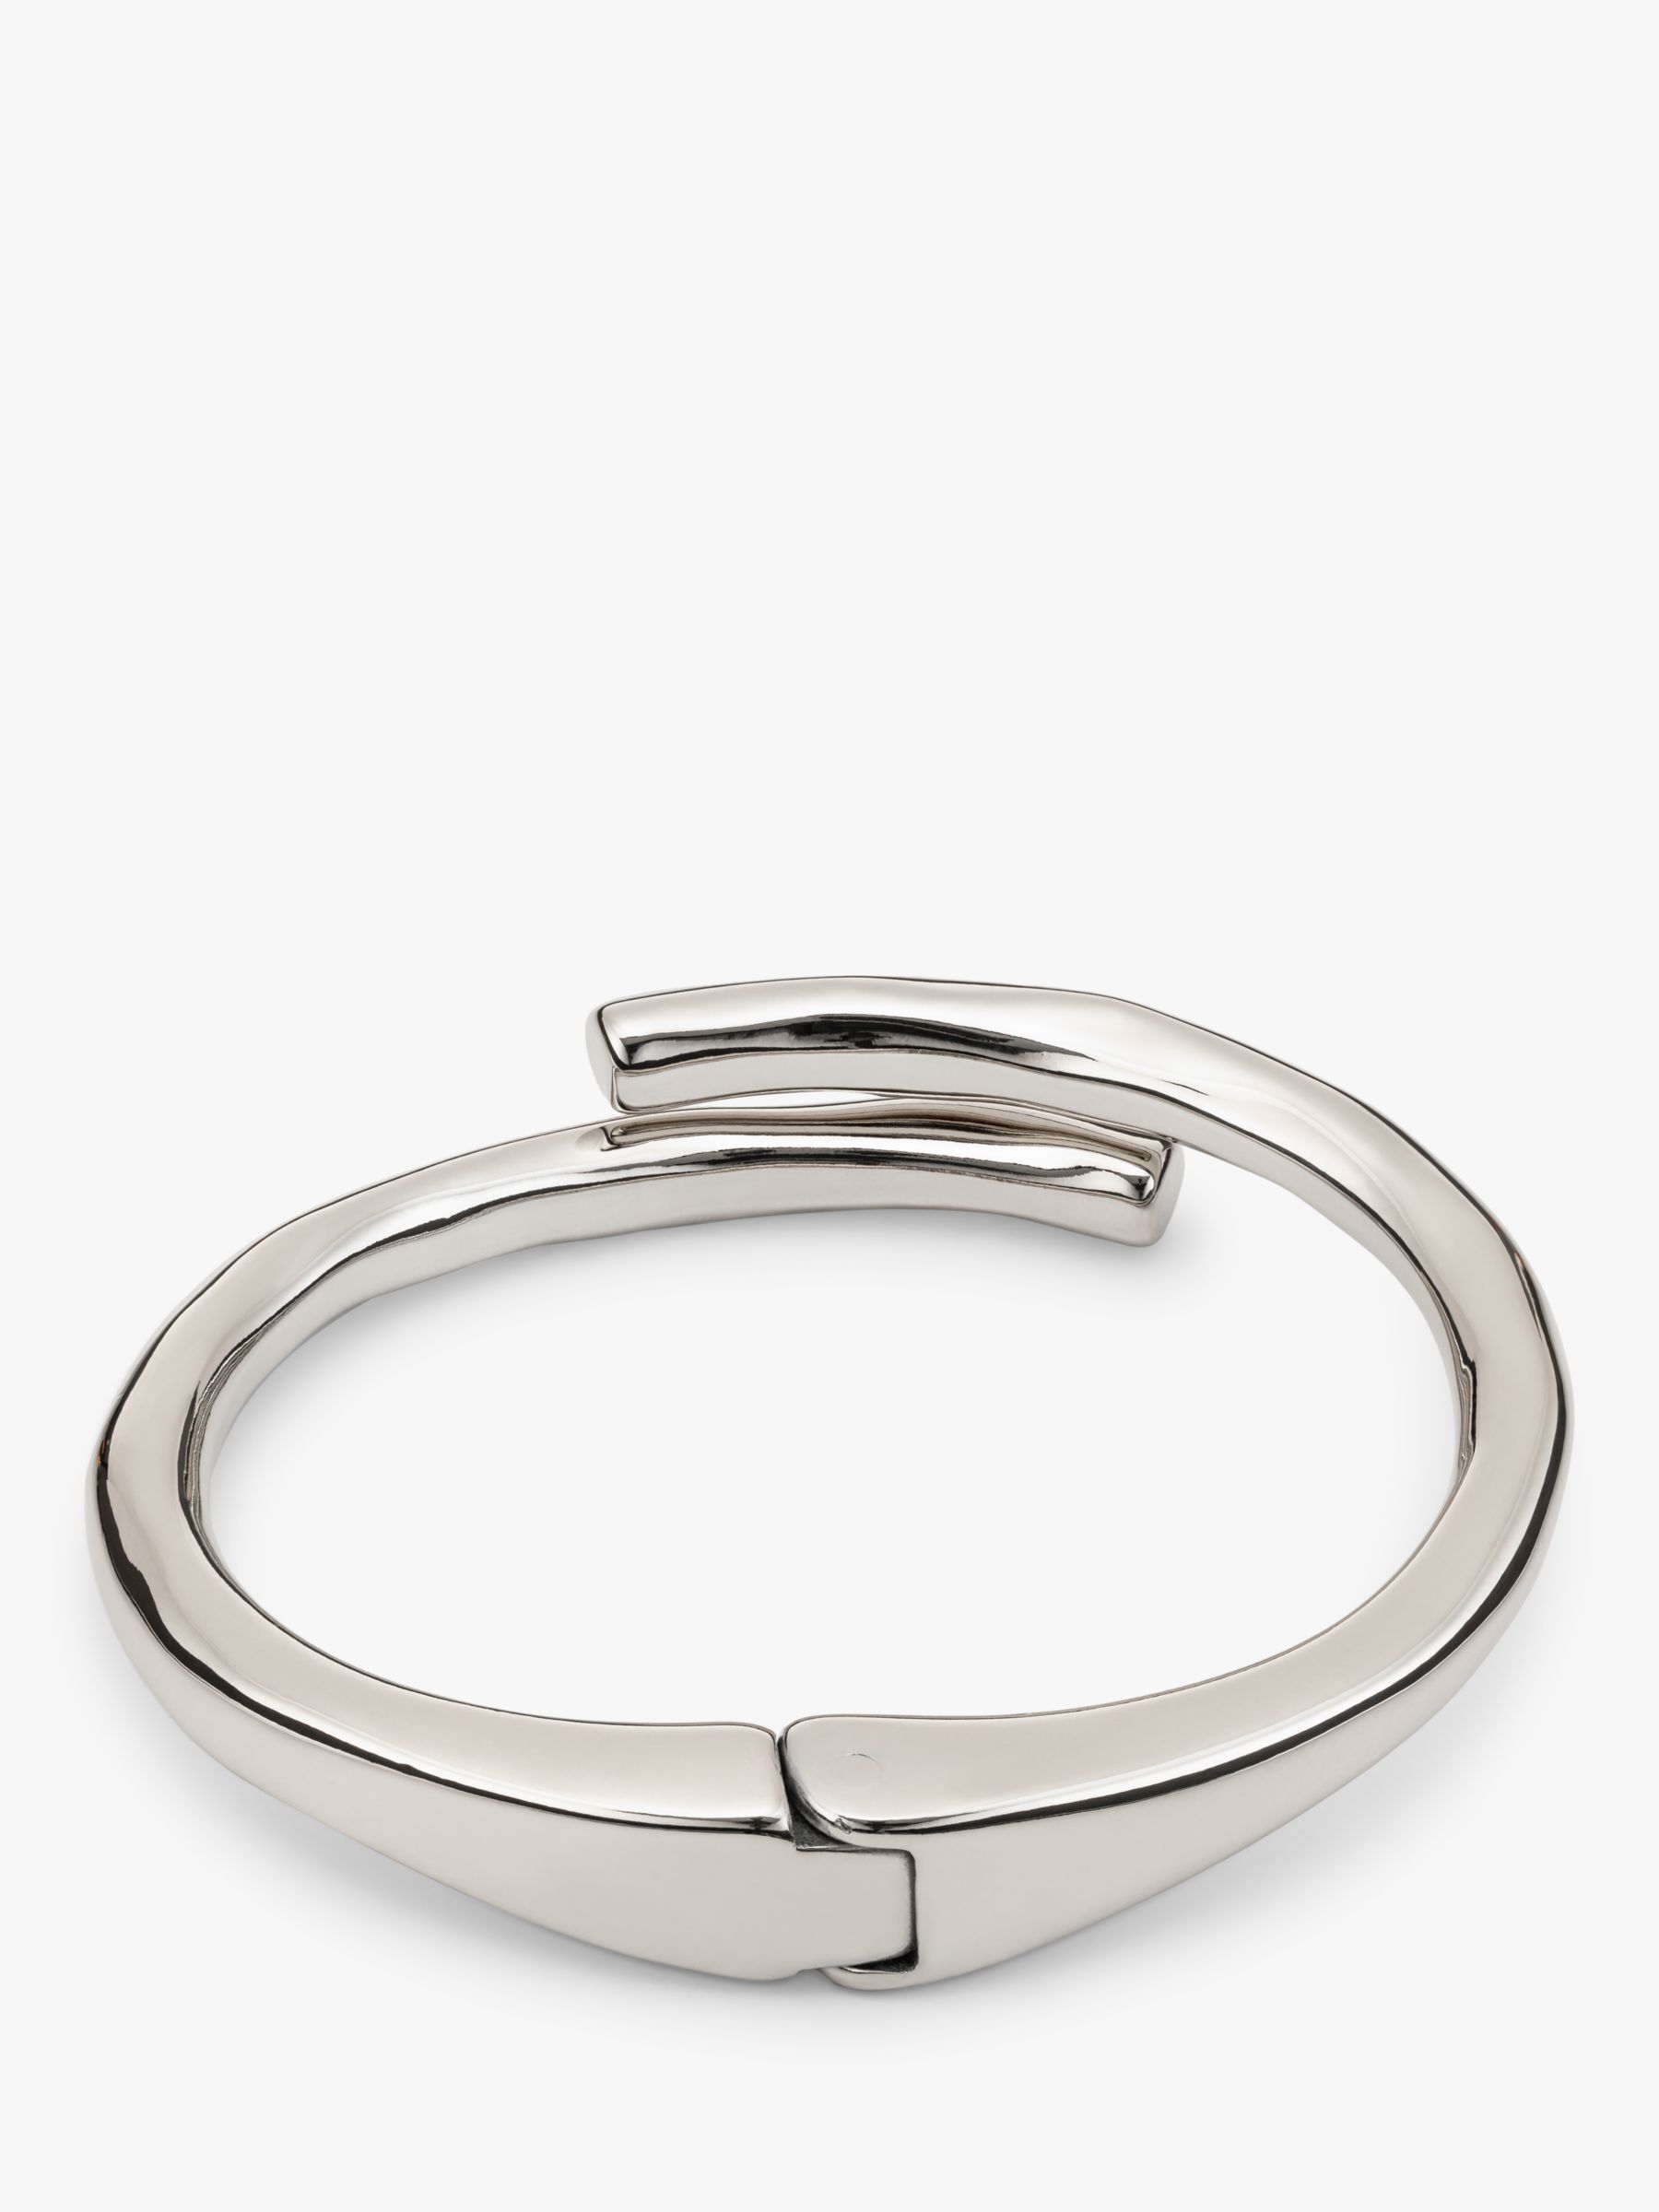 Buy UNOde50 Meeting Point Hinged Bangle, Silver Online at johnlewis.com